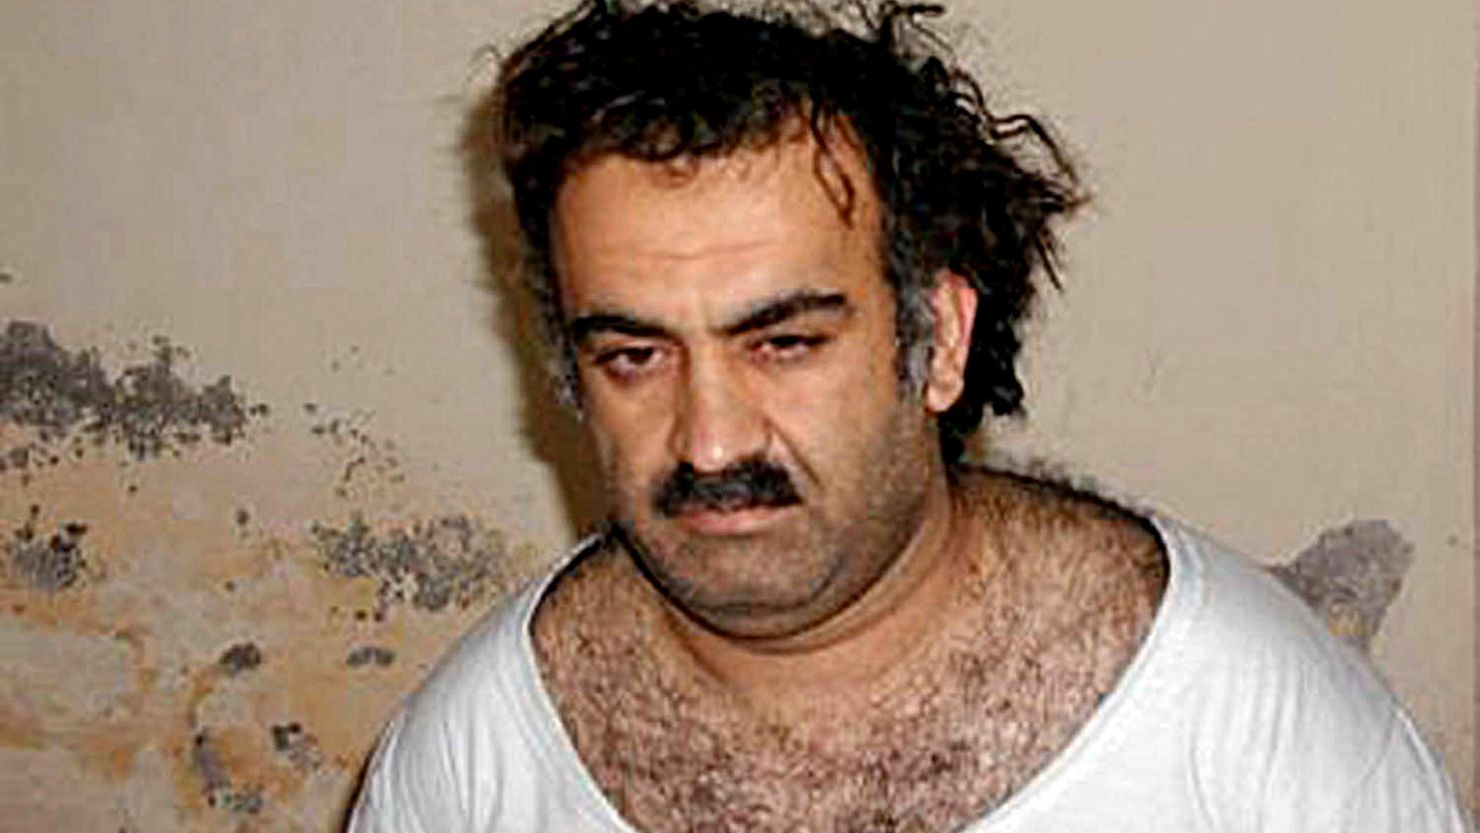 This photo obtained on March 1, 2003, shows alleged plotter of the September 11, 2001, attack, Khalid Sheikh Mohammed.